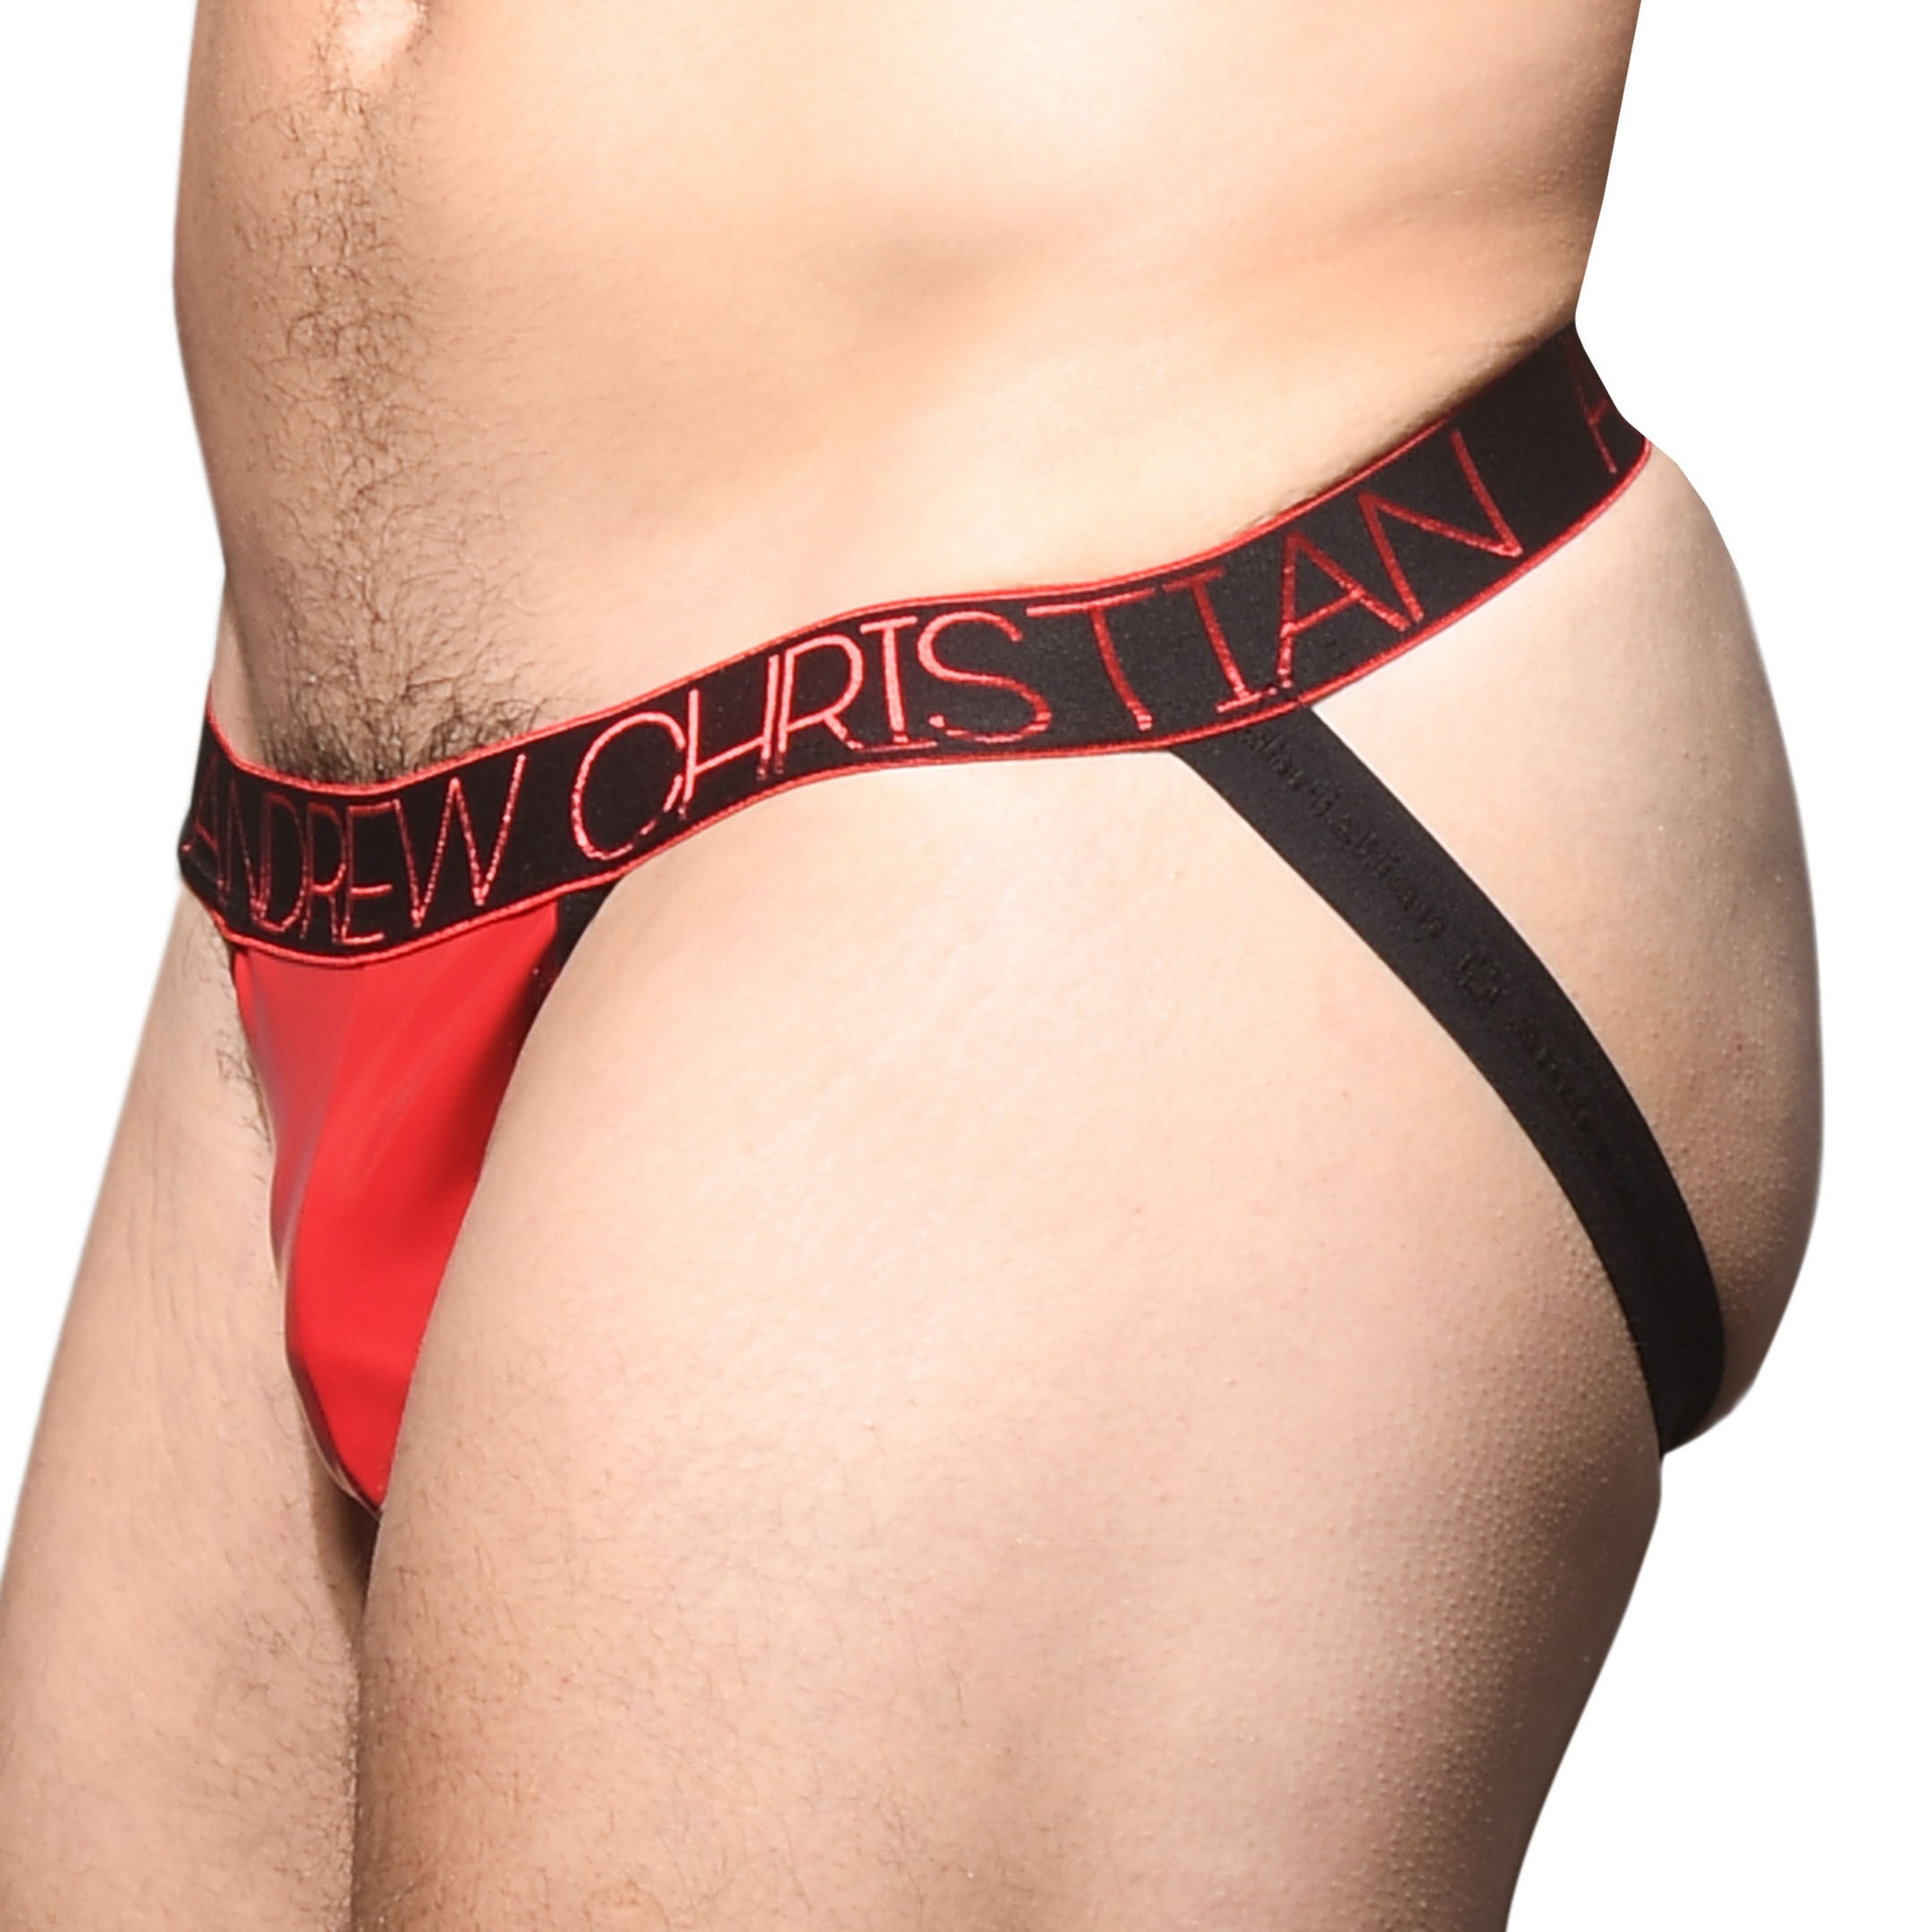 ANDREW CHRISTIAN Almost Naked Jockstrap - Large Pouch Jock